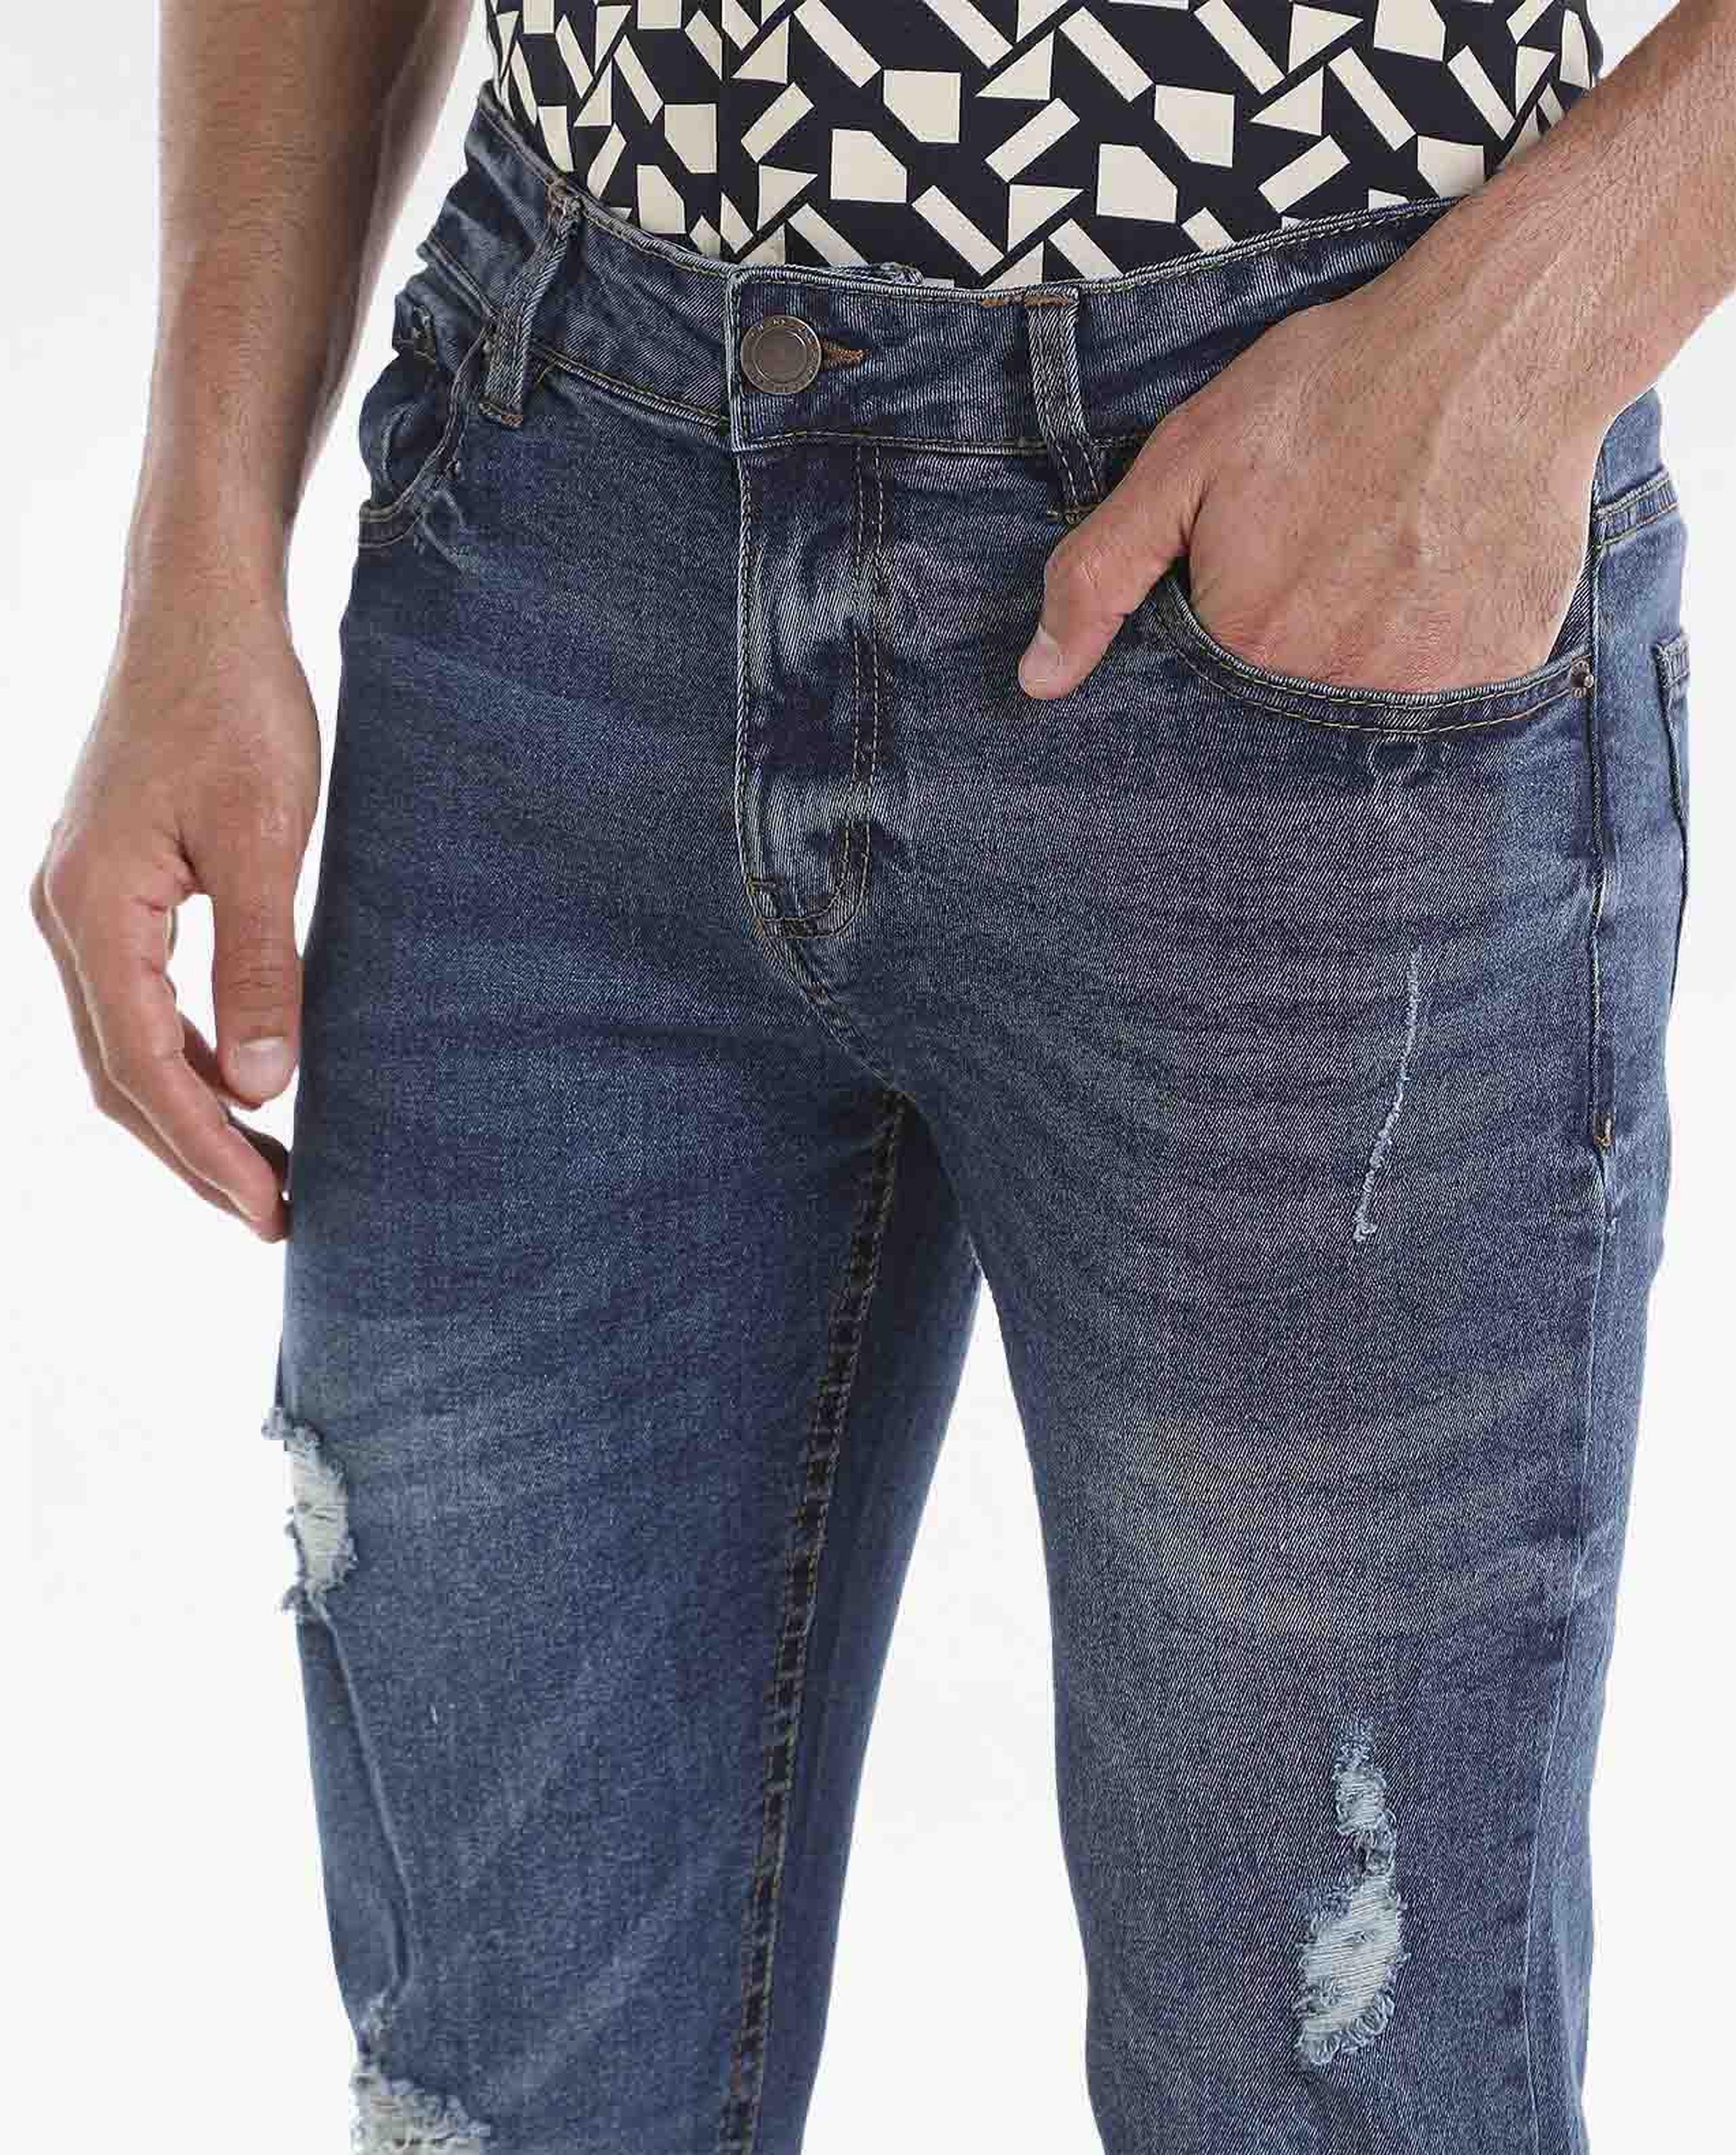 Light Faded Mildly Distressed Mid-Rise Jeans with Button Closure